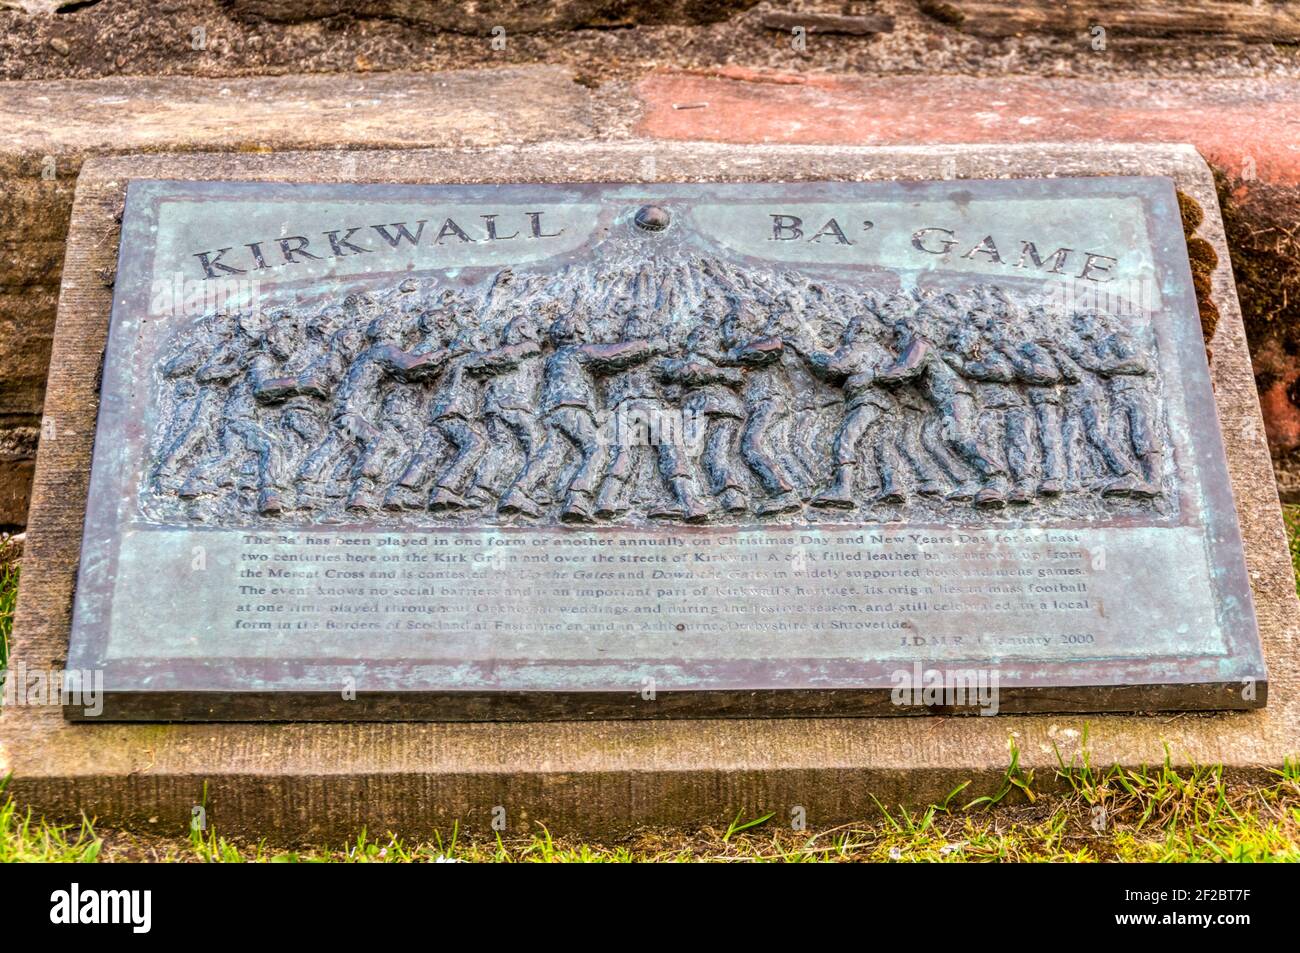 A plaque commemorating the Kirkwall Ba' Game in Kirkwall, Orkney. Stock Photo